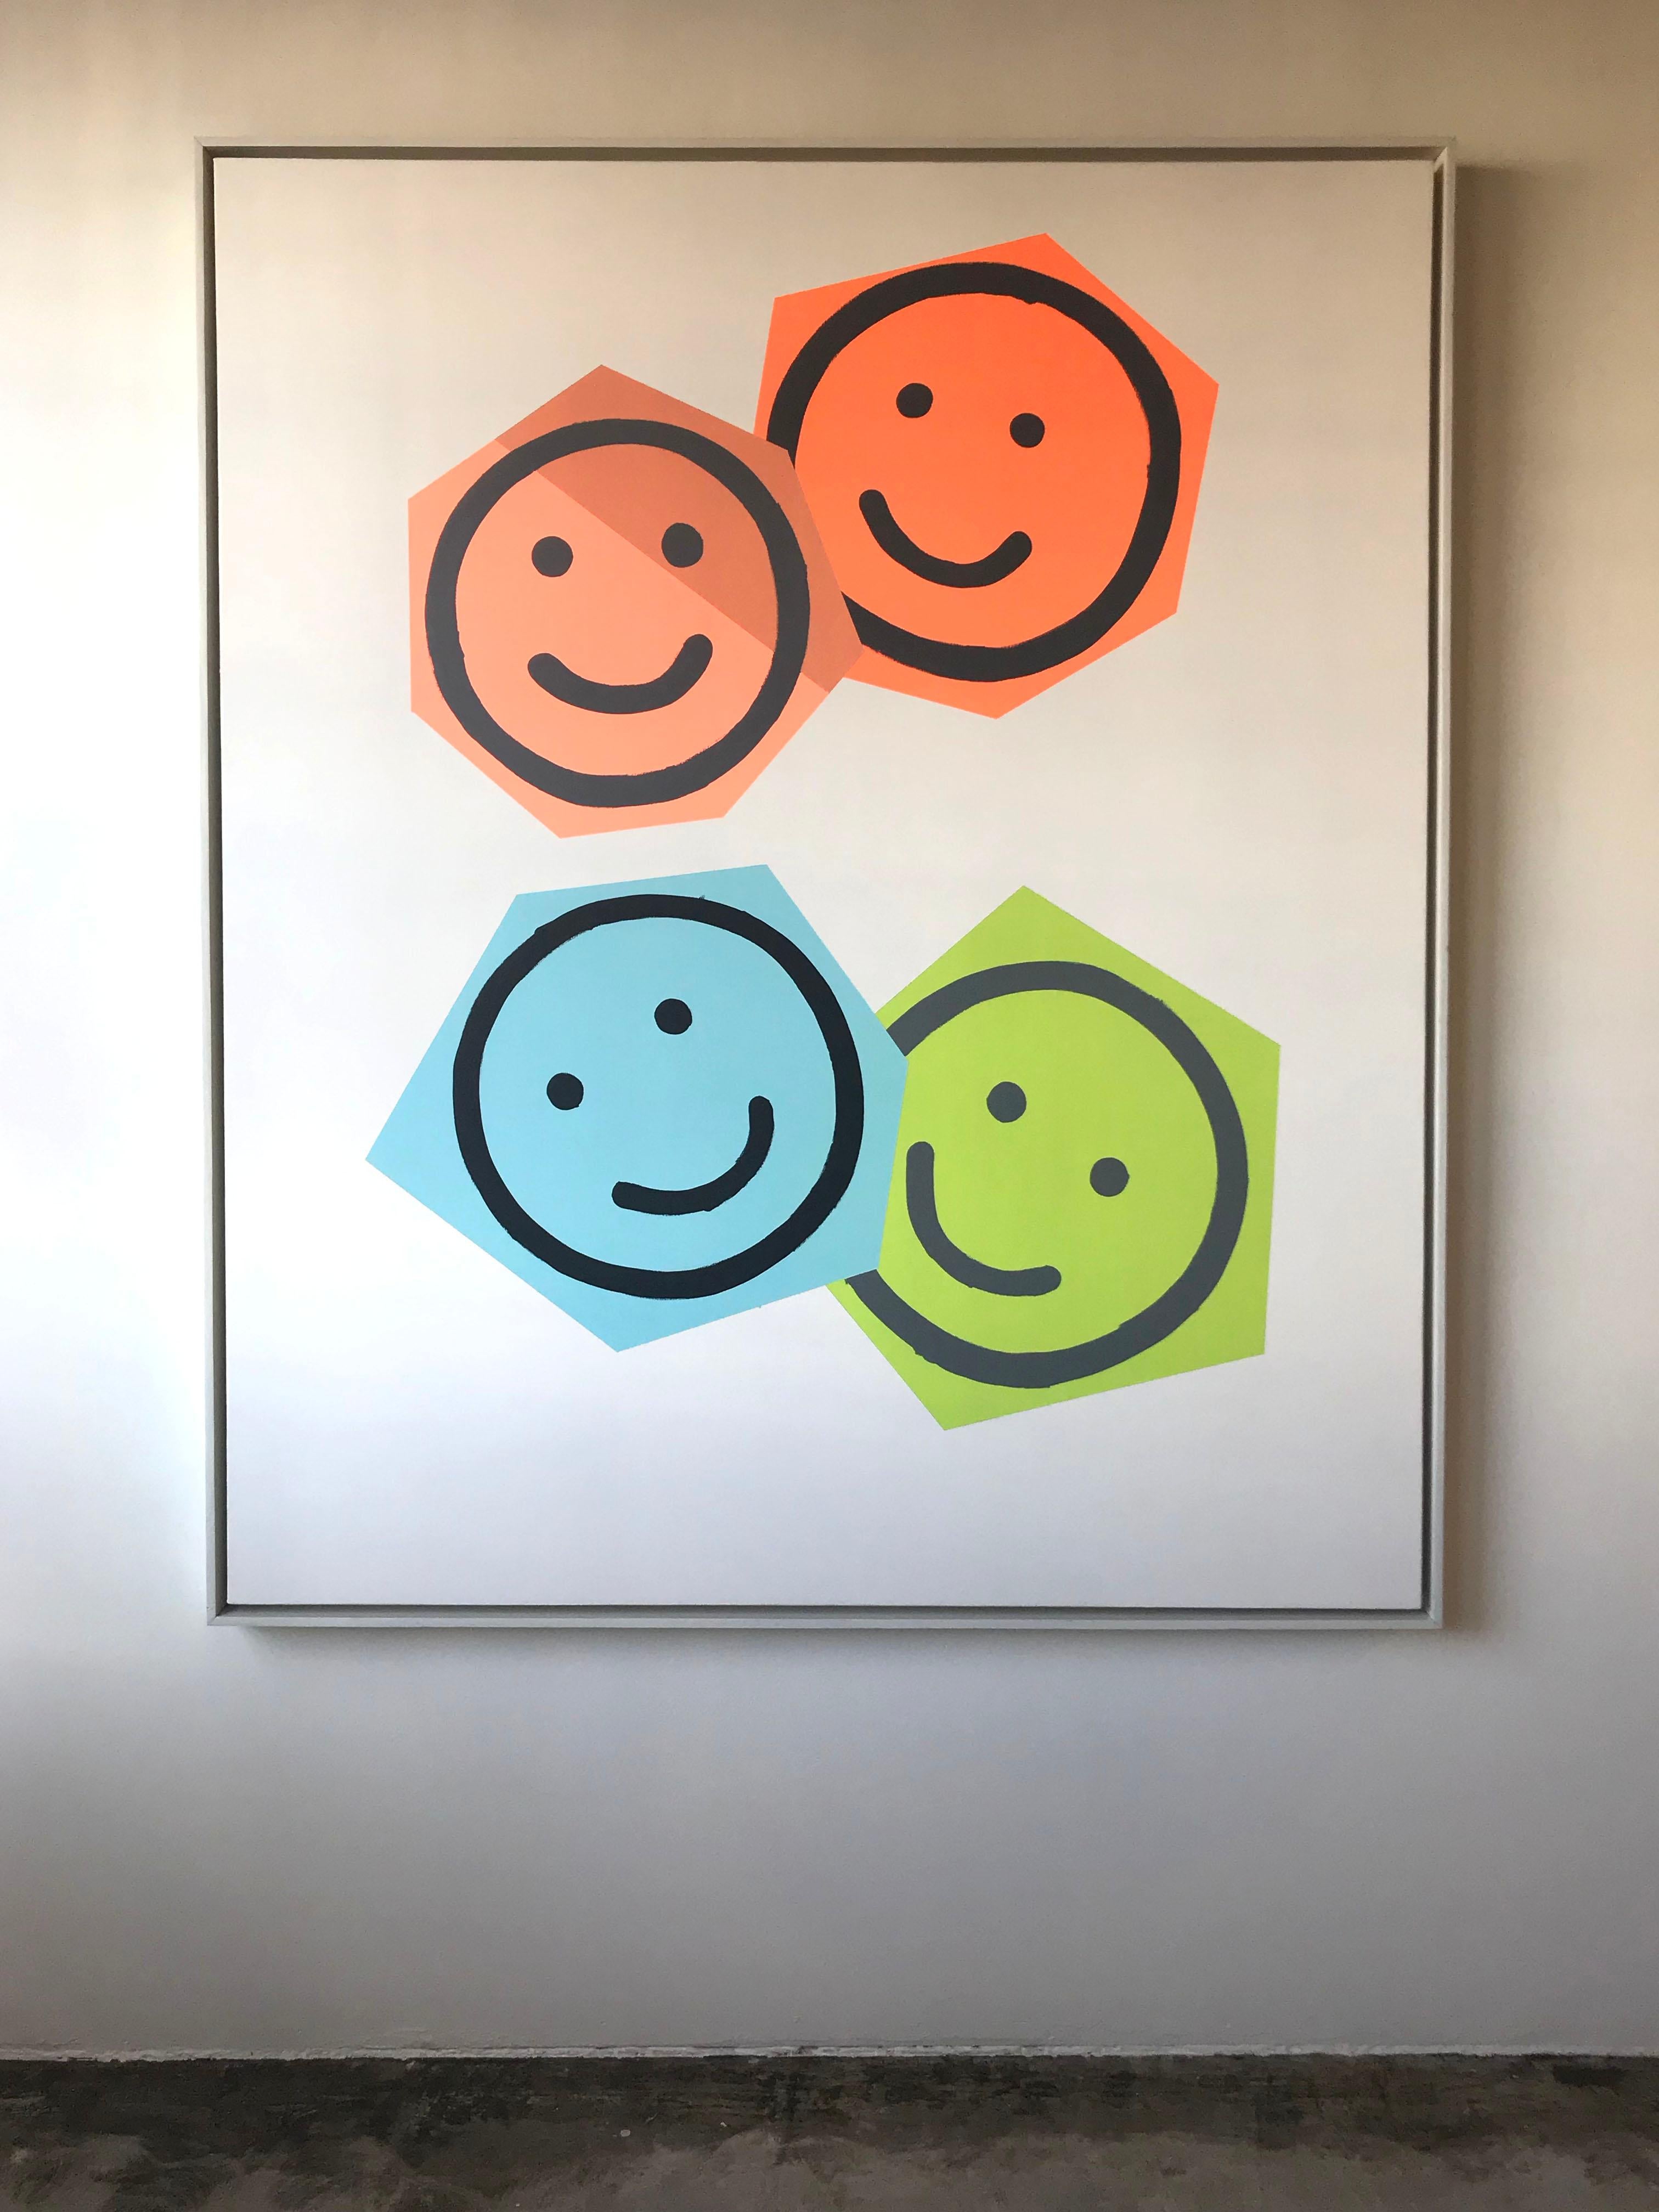 Matthew Heller Abstract Painting - Family Portrait #5, Smile, Smiley Faces, Emoji, Shapes, Painting, Large, Happy